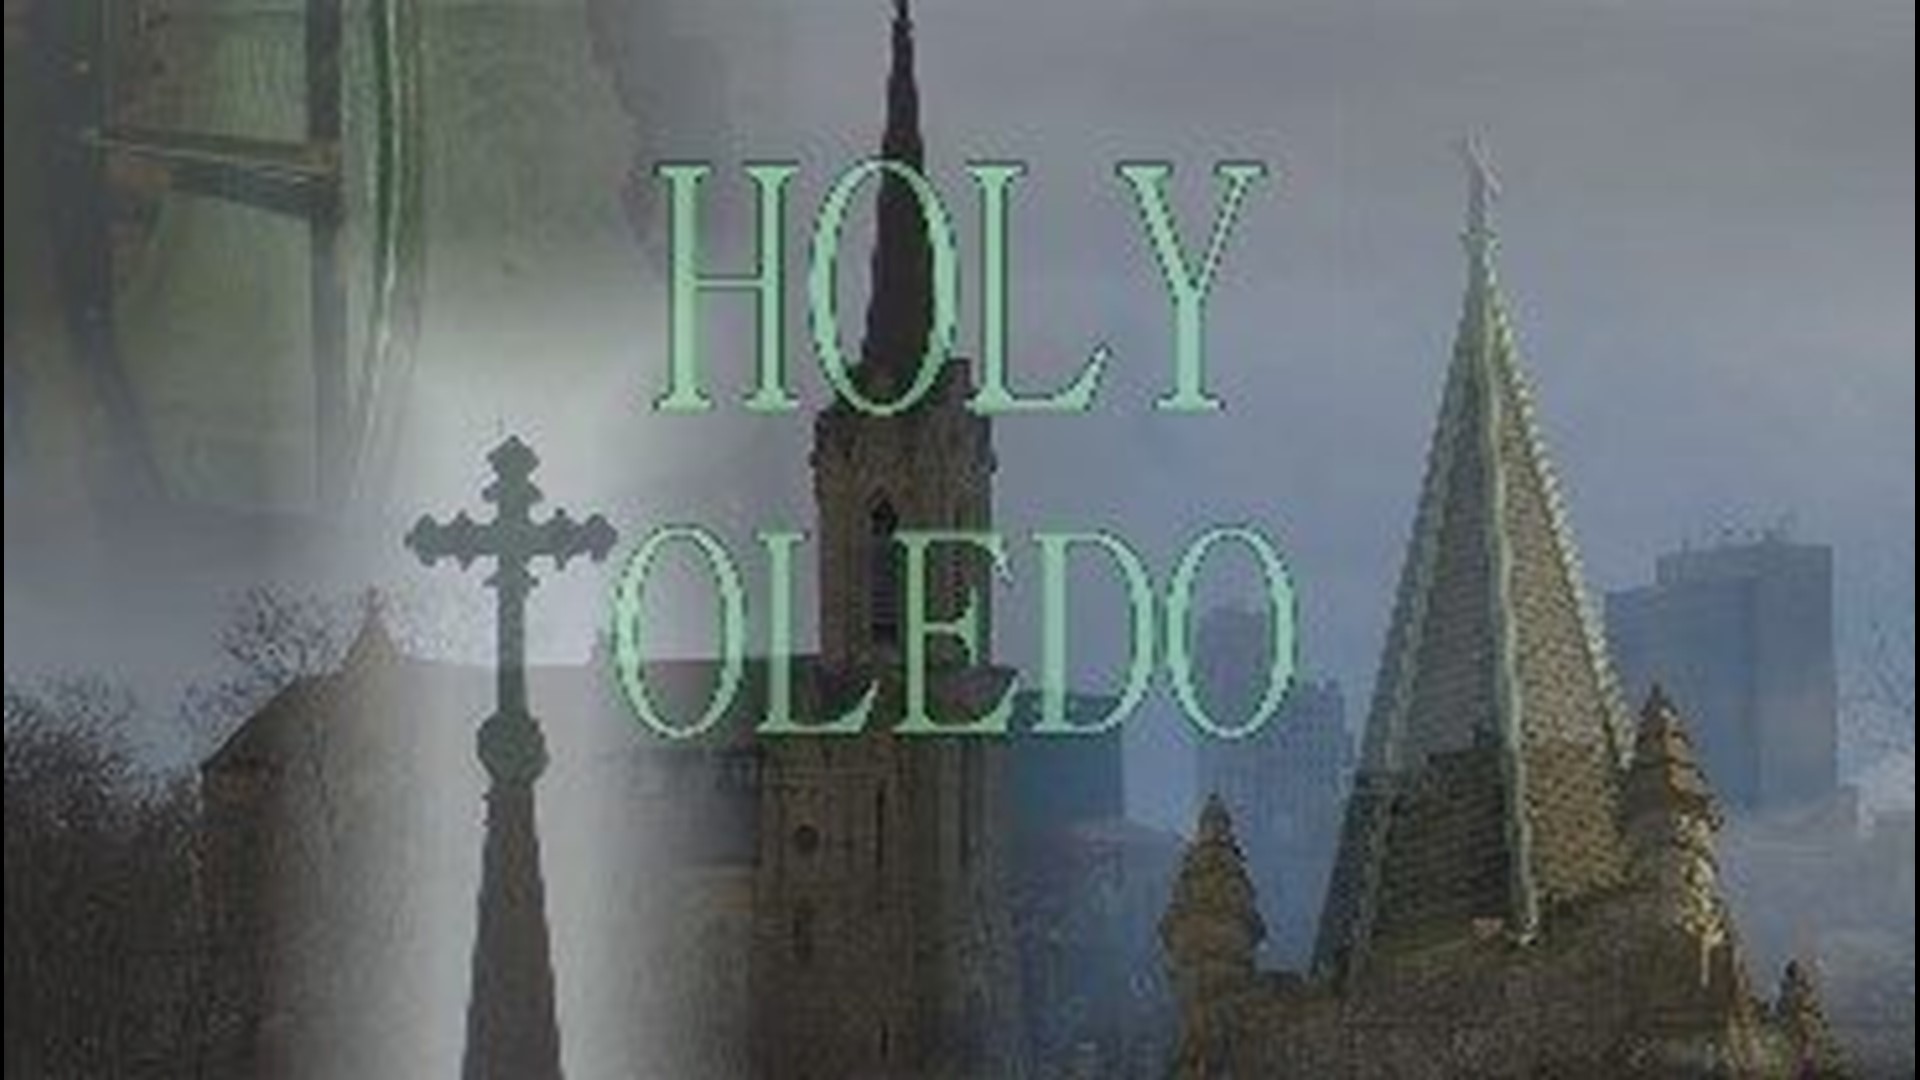 Holy Toledo: An inside look at Glass City churches